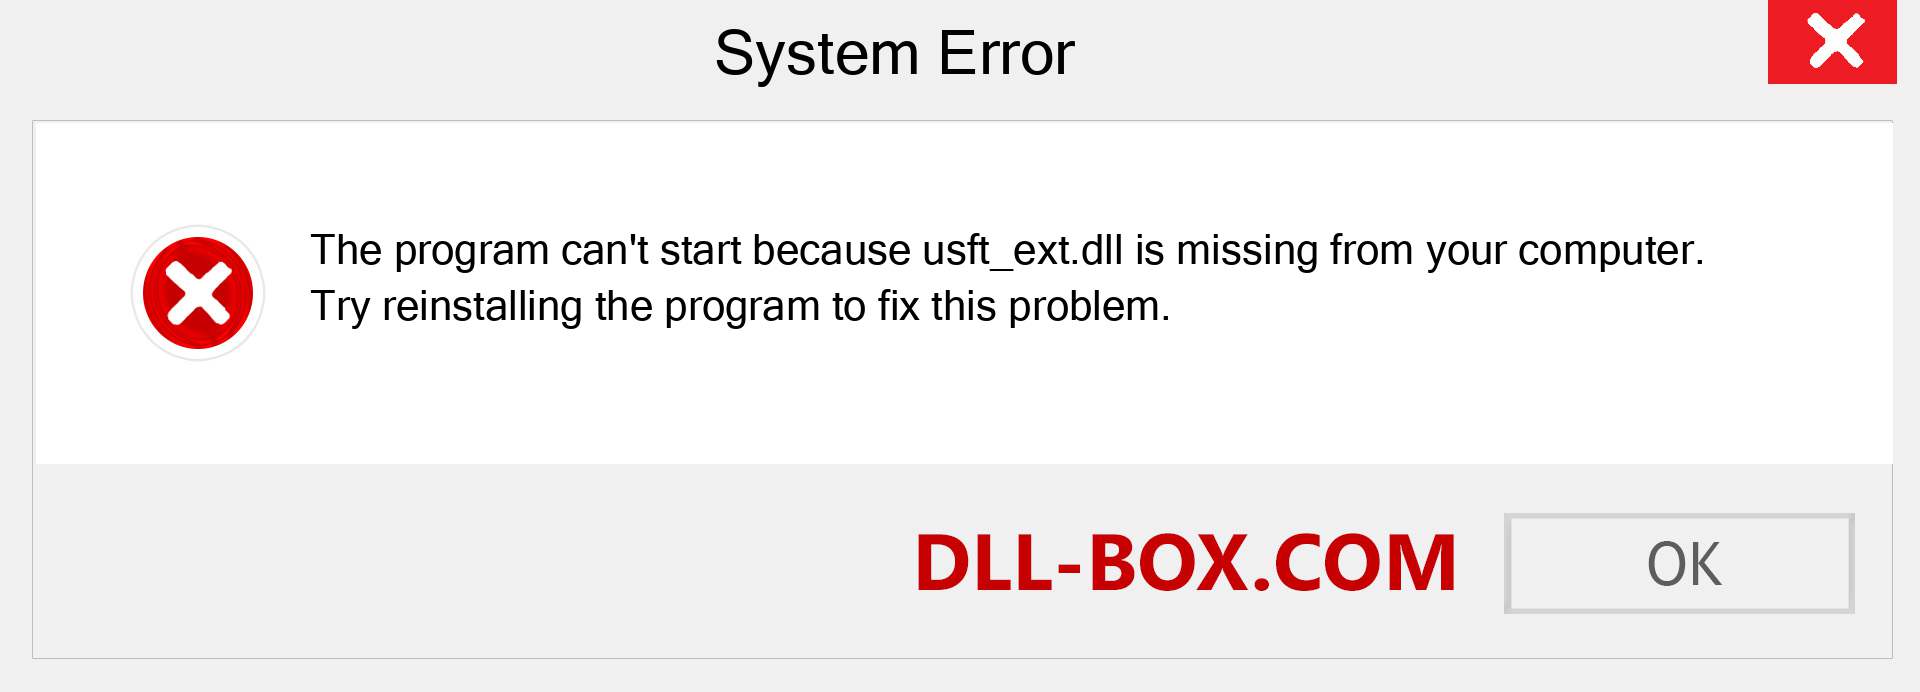  usft_ext.dll file is missing?. Download for Windows 7, 8, 10 - Fix  usft_ext dll Missing Error on Windows, photos, images